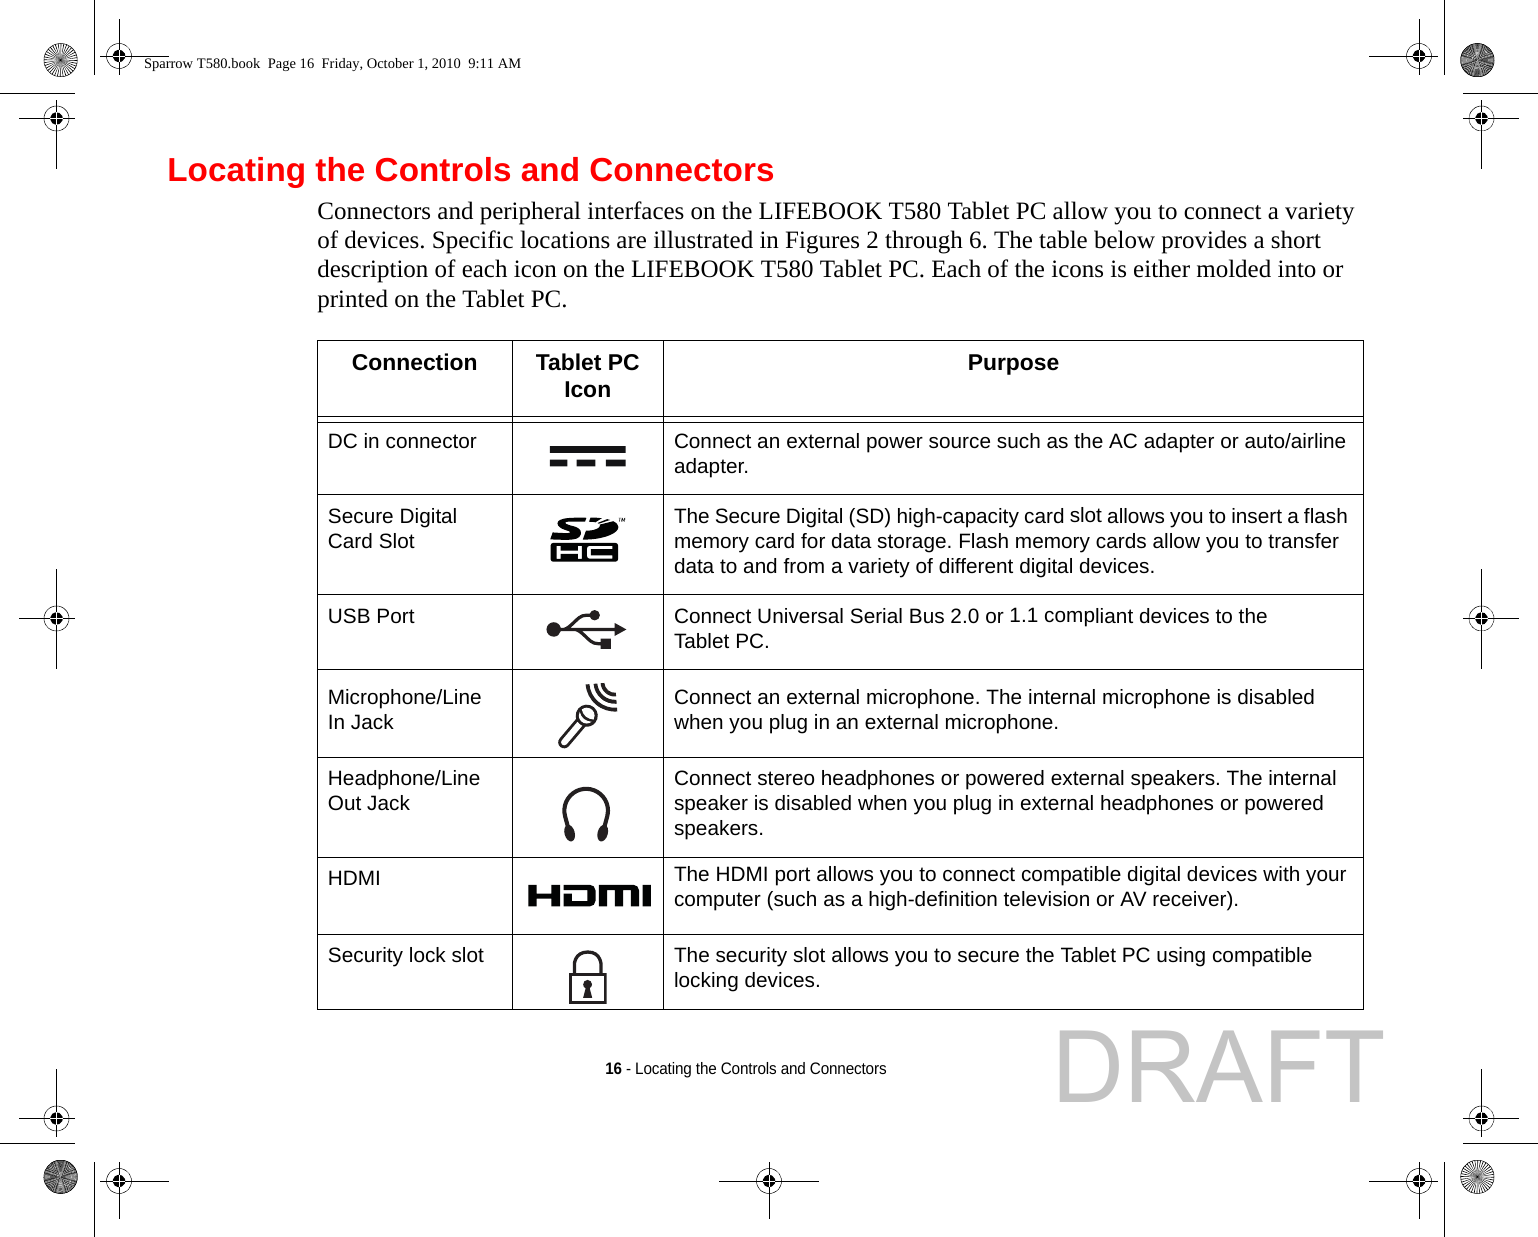 16 - Locating the Controls and ConnectorsLocating the Controls and ConnectorsConnectors and peripheral interfaces on the LIFEBOOK T580 Tablet PC allow you to connect a variety of devices. Specific locations are illustrated in Figures 2 through 6. The table below provides a short description of each icon on the LIFEBOOK T580 Tablet PC. Each of the icons is either molded into or printed on the Tablet PC.Connection Tablet PC Icon PurposeDC in connector Connect an external power source such as the AC adapter or auto/airline adapter. Secure Digital Card Slot The Secure Digital (SD) high-capacity card slot allows you to insert a flash memory card for data storage. Flash memory cards allow you to transfer data to and from a variety of different digital devices.USB Port Connect Universal Serial Bus 2.0 or 1.1 compliant devices to the Tablet PC.Microphone/Line In Jack Connect an external microphone. The internal microphone is disabled when you plug in an external microphone. Headphone/Line Out Jack Connect stereo headphones or powered external speakers. The internal speaker is disabled when you plug in external headphones or powered speakers. HDMI The HDMI port allows you to connect compatible digital devices with your computer (such as a high-definition television or AV receiver).Security lock slot The security slot allows you to secure the Tablet PC using compatible locking devices.Sparrow T580.book  Page 16  Friday, October 1, 2010  9:11 AMDRAFT